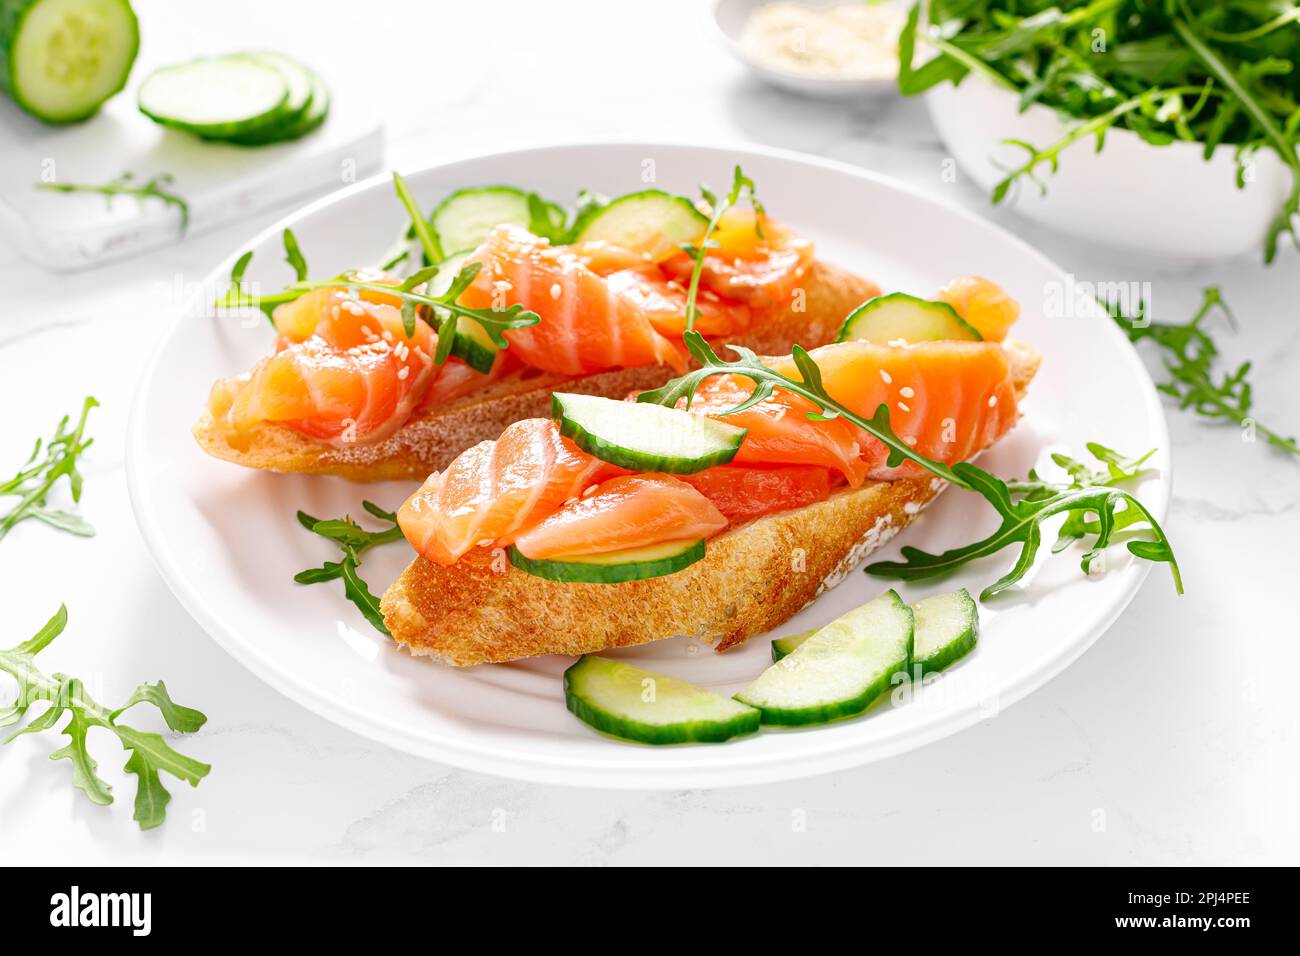 Sandwiches with salted salmon. Healthy food, breakfast Stock Photo